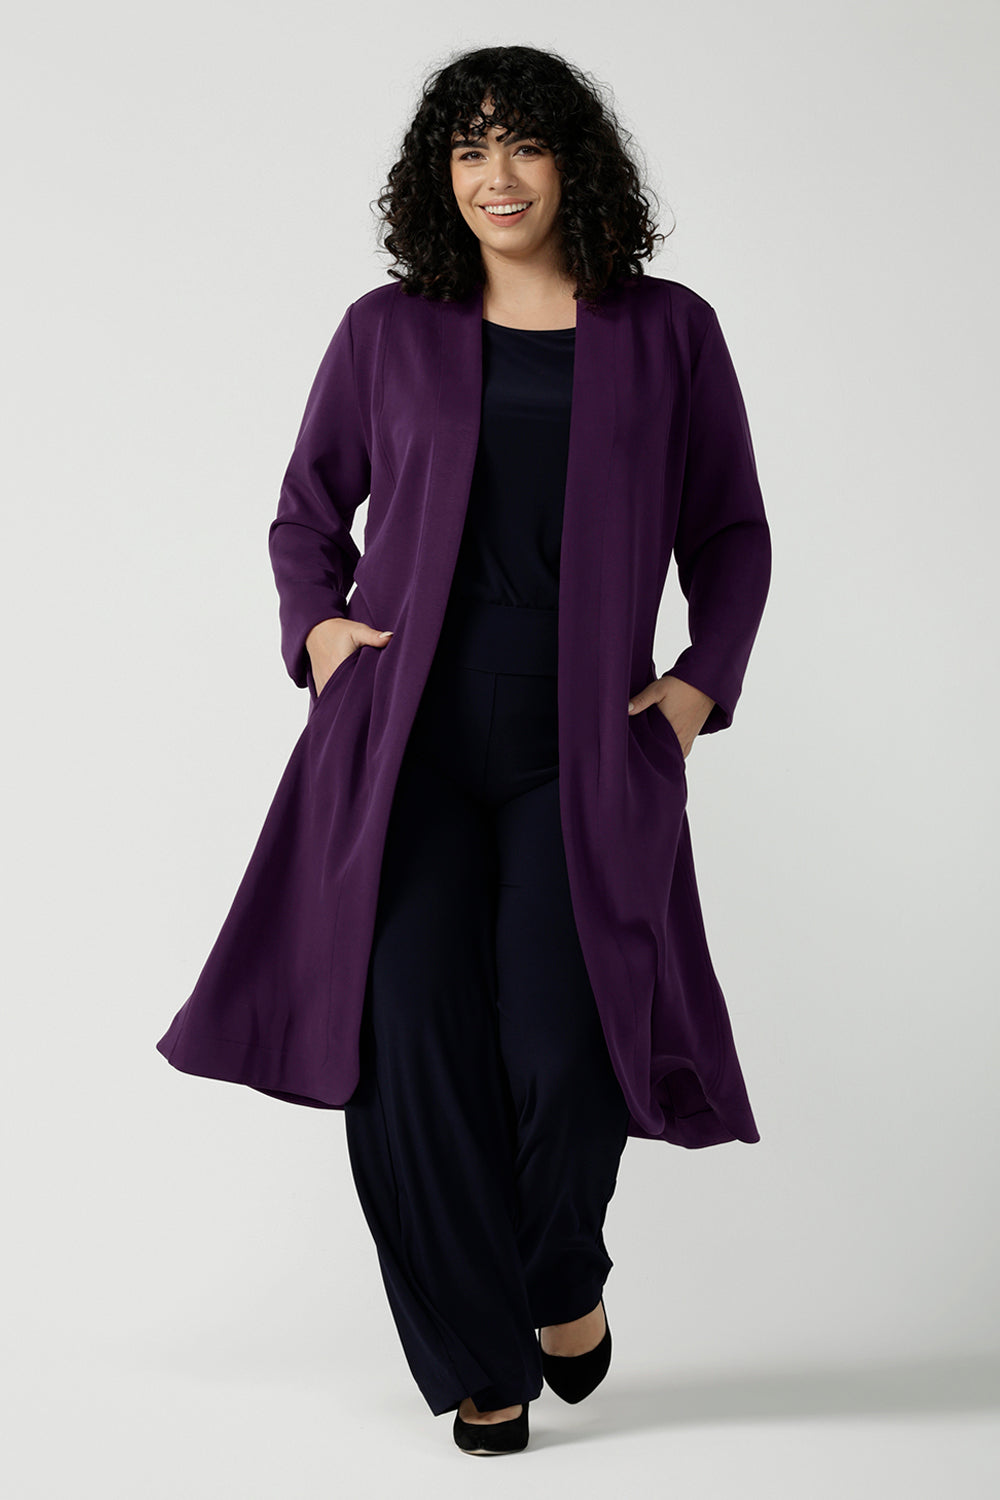 Size 18 woman wears the Sorel Trenchcoat in Amethyst. Inner seam pockets with, long sleeves with wrap tie. Made in Australia using soft modal scuba material. Made in Australia for women size 8 - 24.